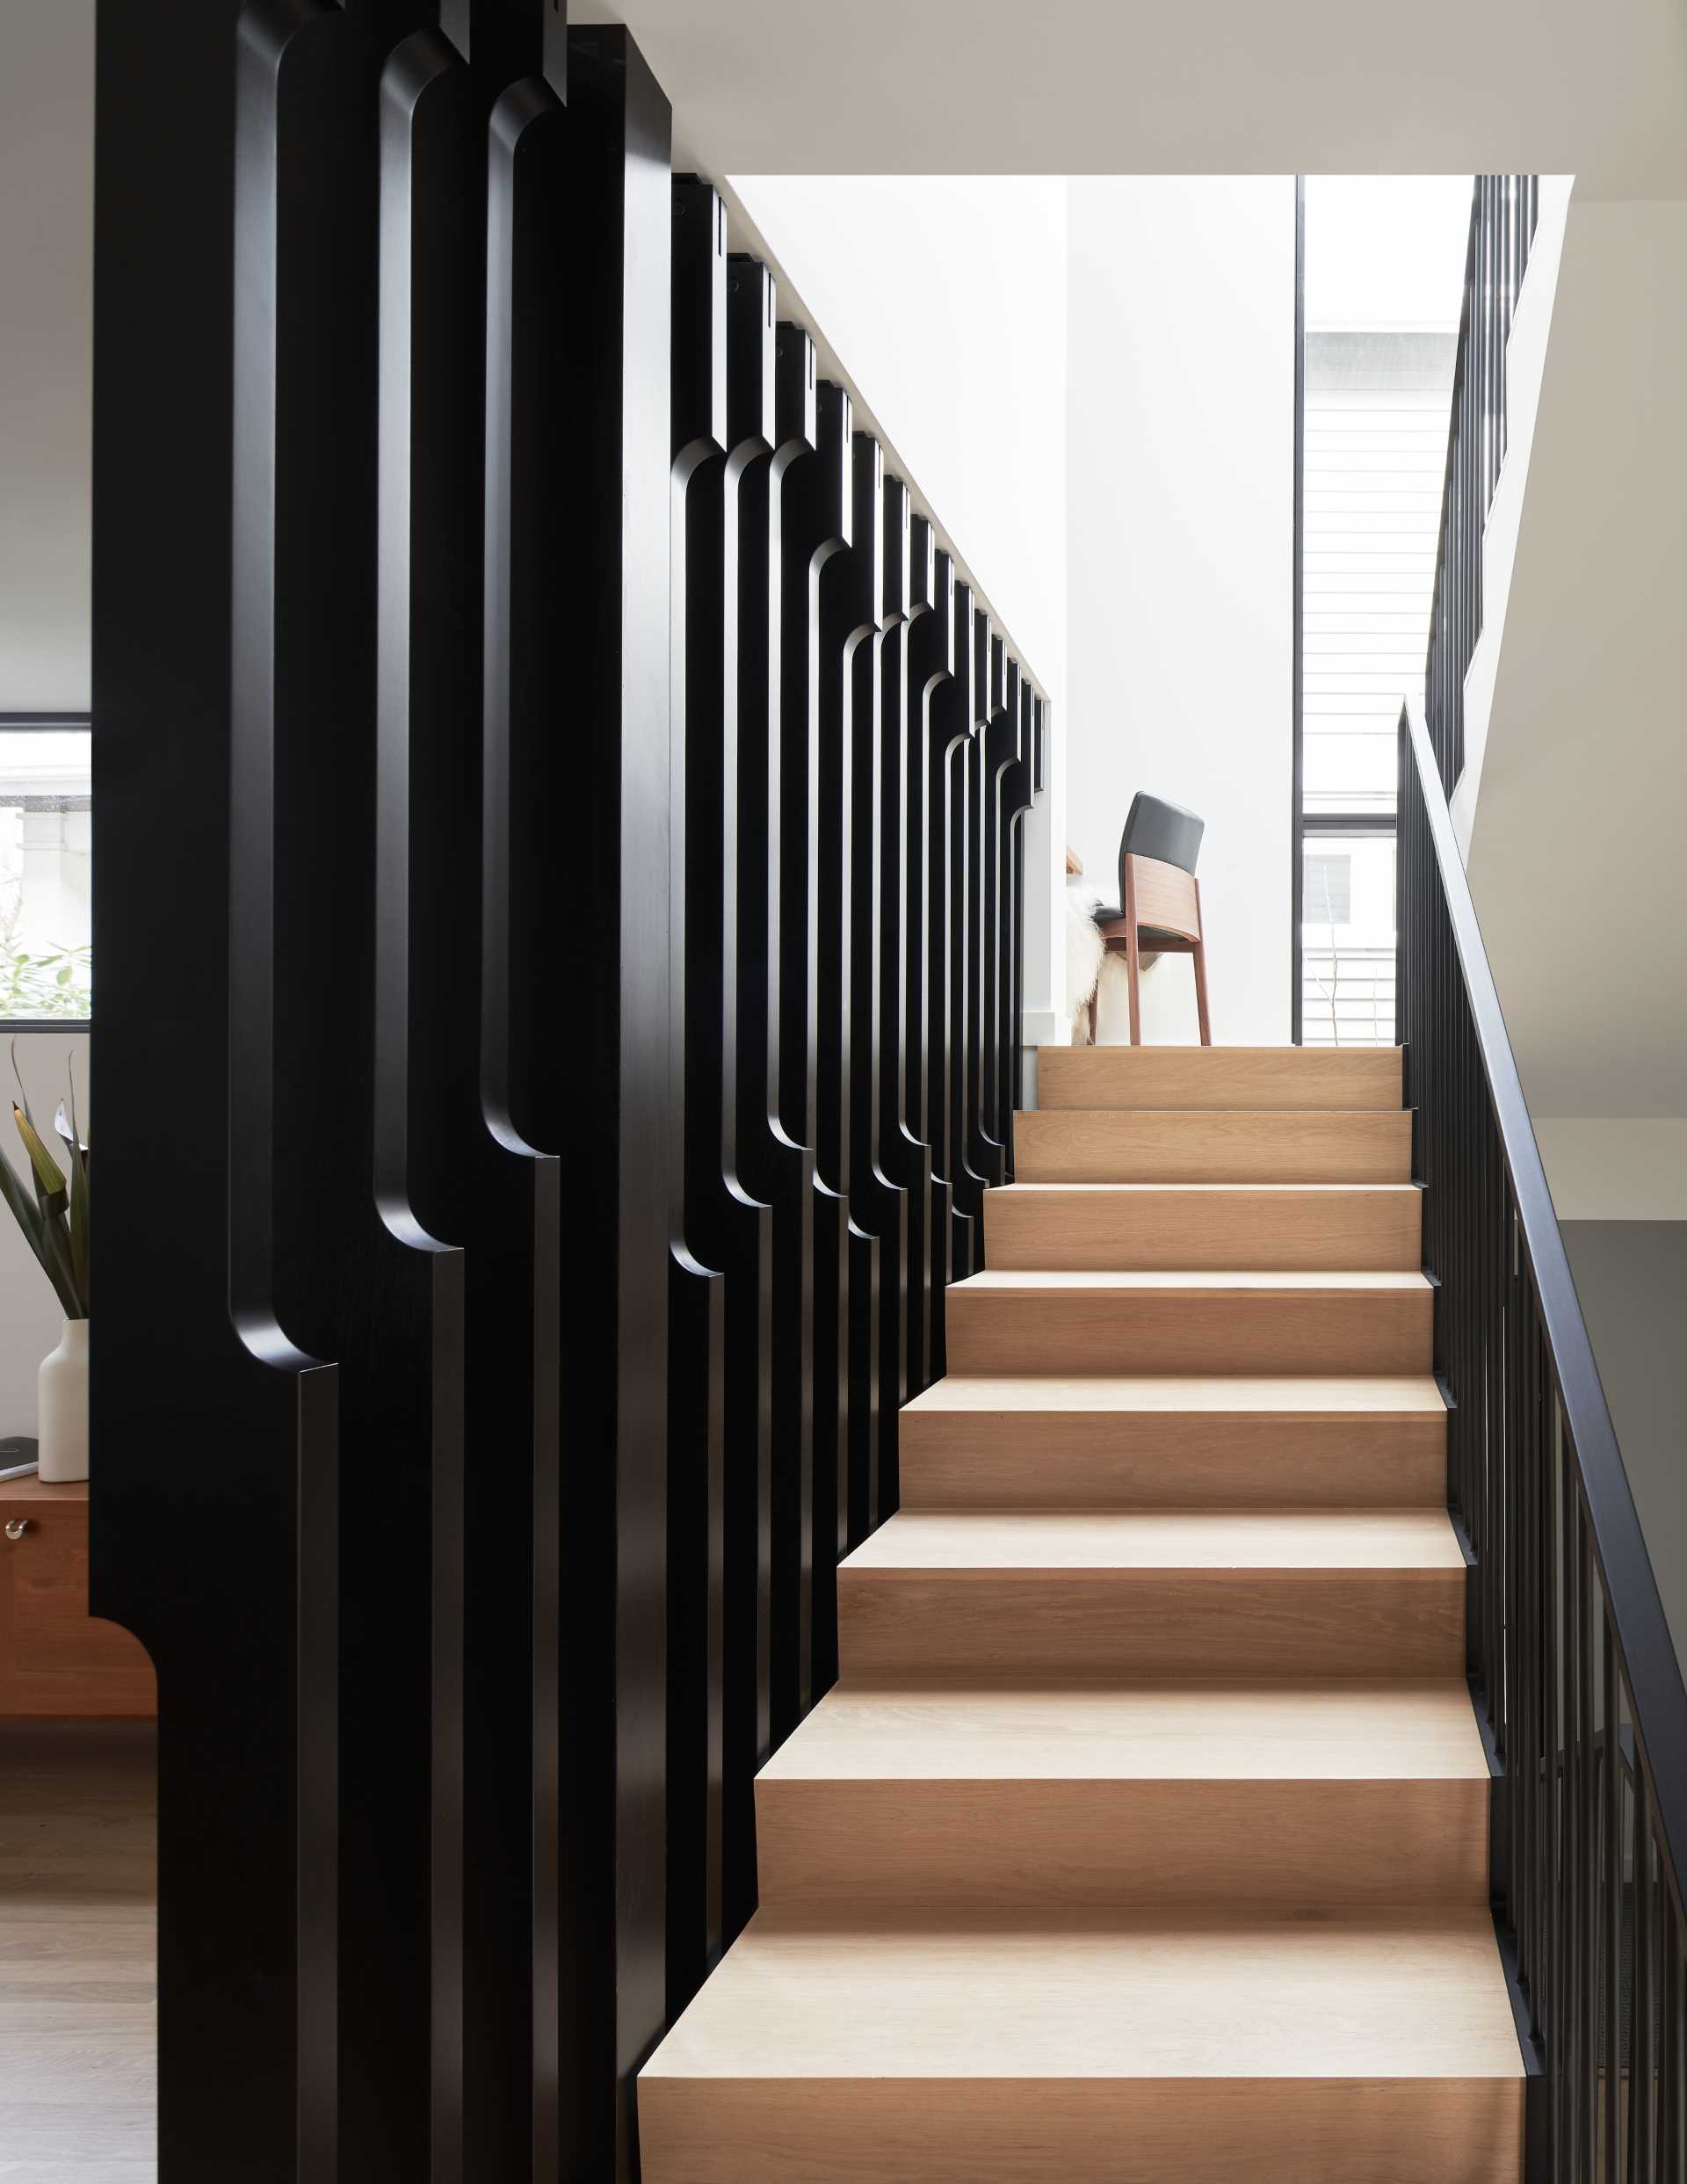 A modern wood and black staircase with a small office nook in the landing.